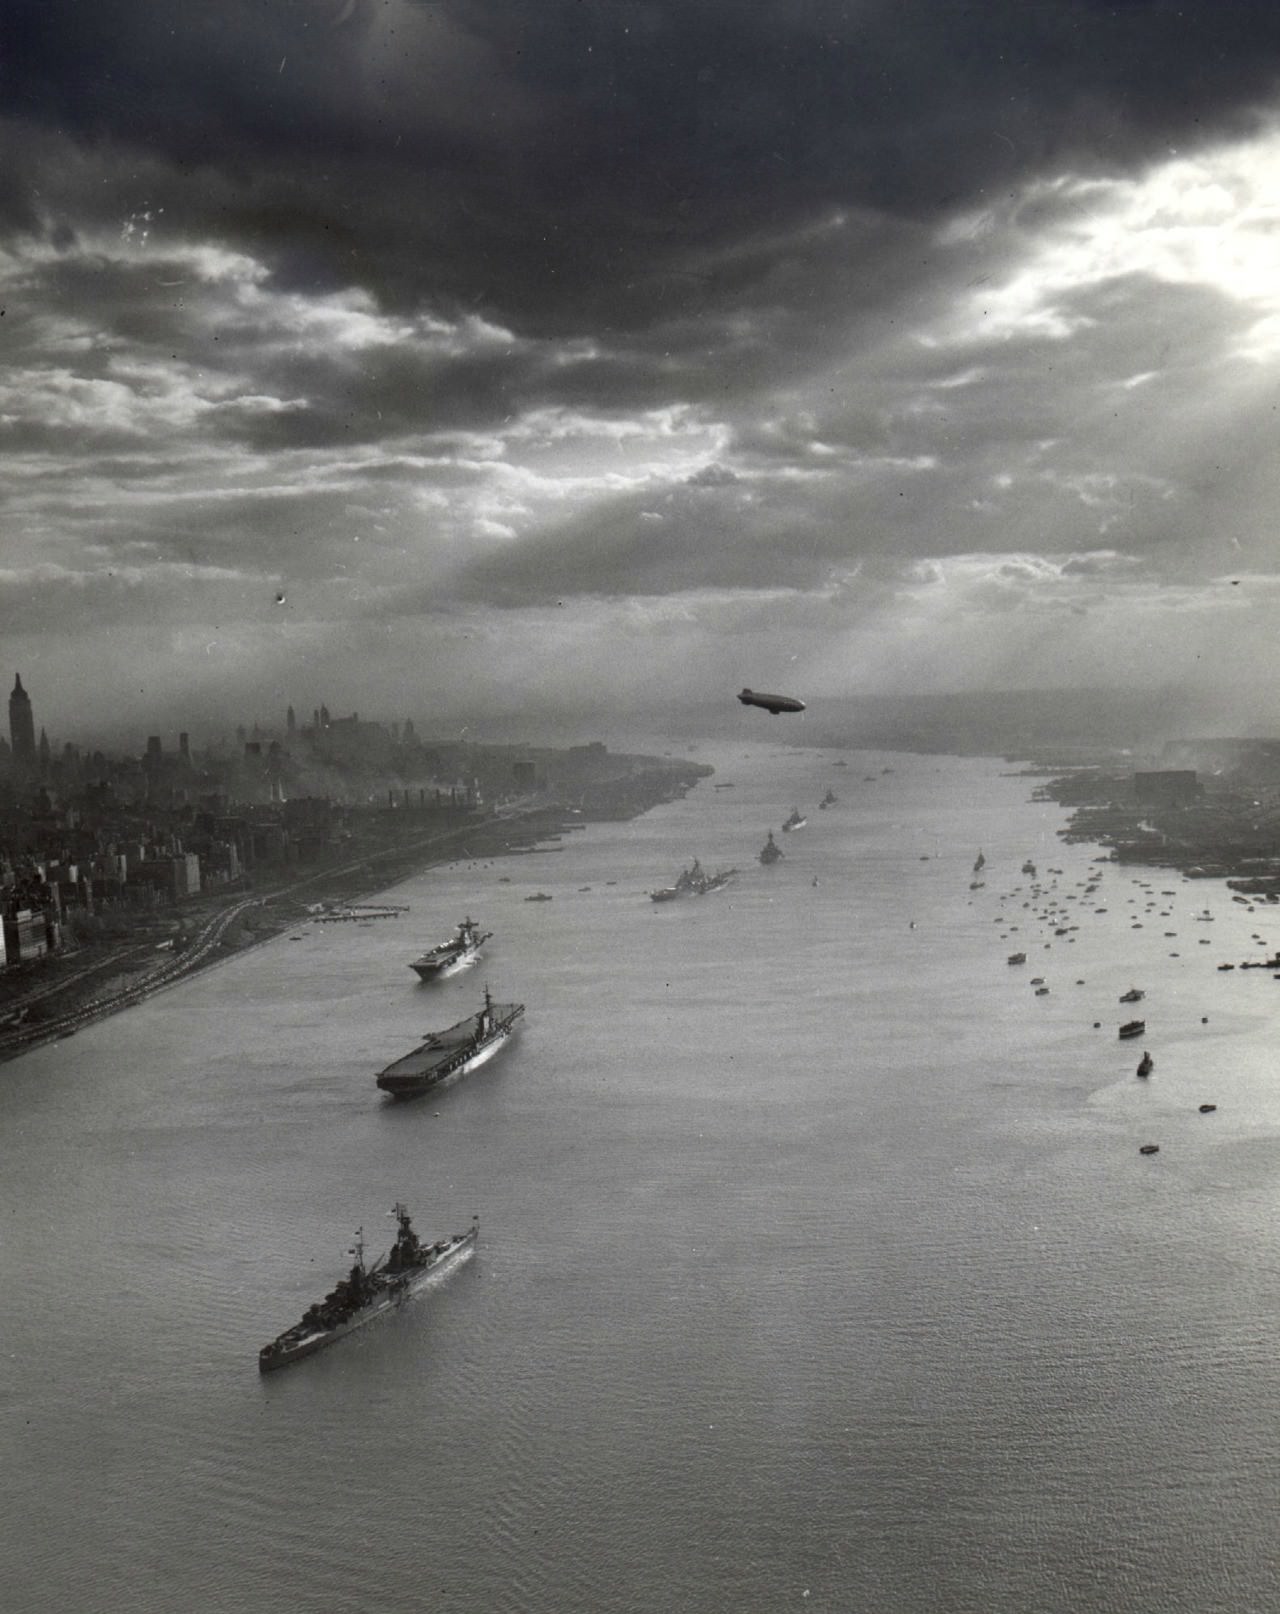 General 1280x1614 photography monochrome United States Navy river Battleships ship USA New York City history 1945 (year) clouds portrait display cityscape skyscraper sun rays vintage old photos Hudson River parade blimp airships